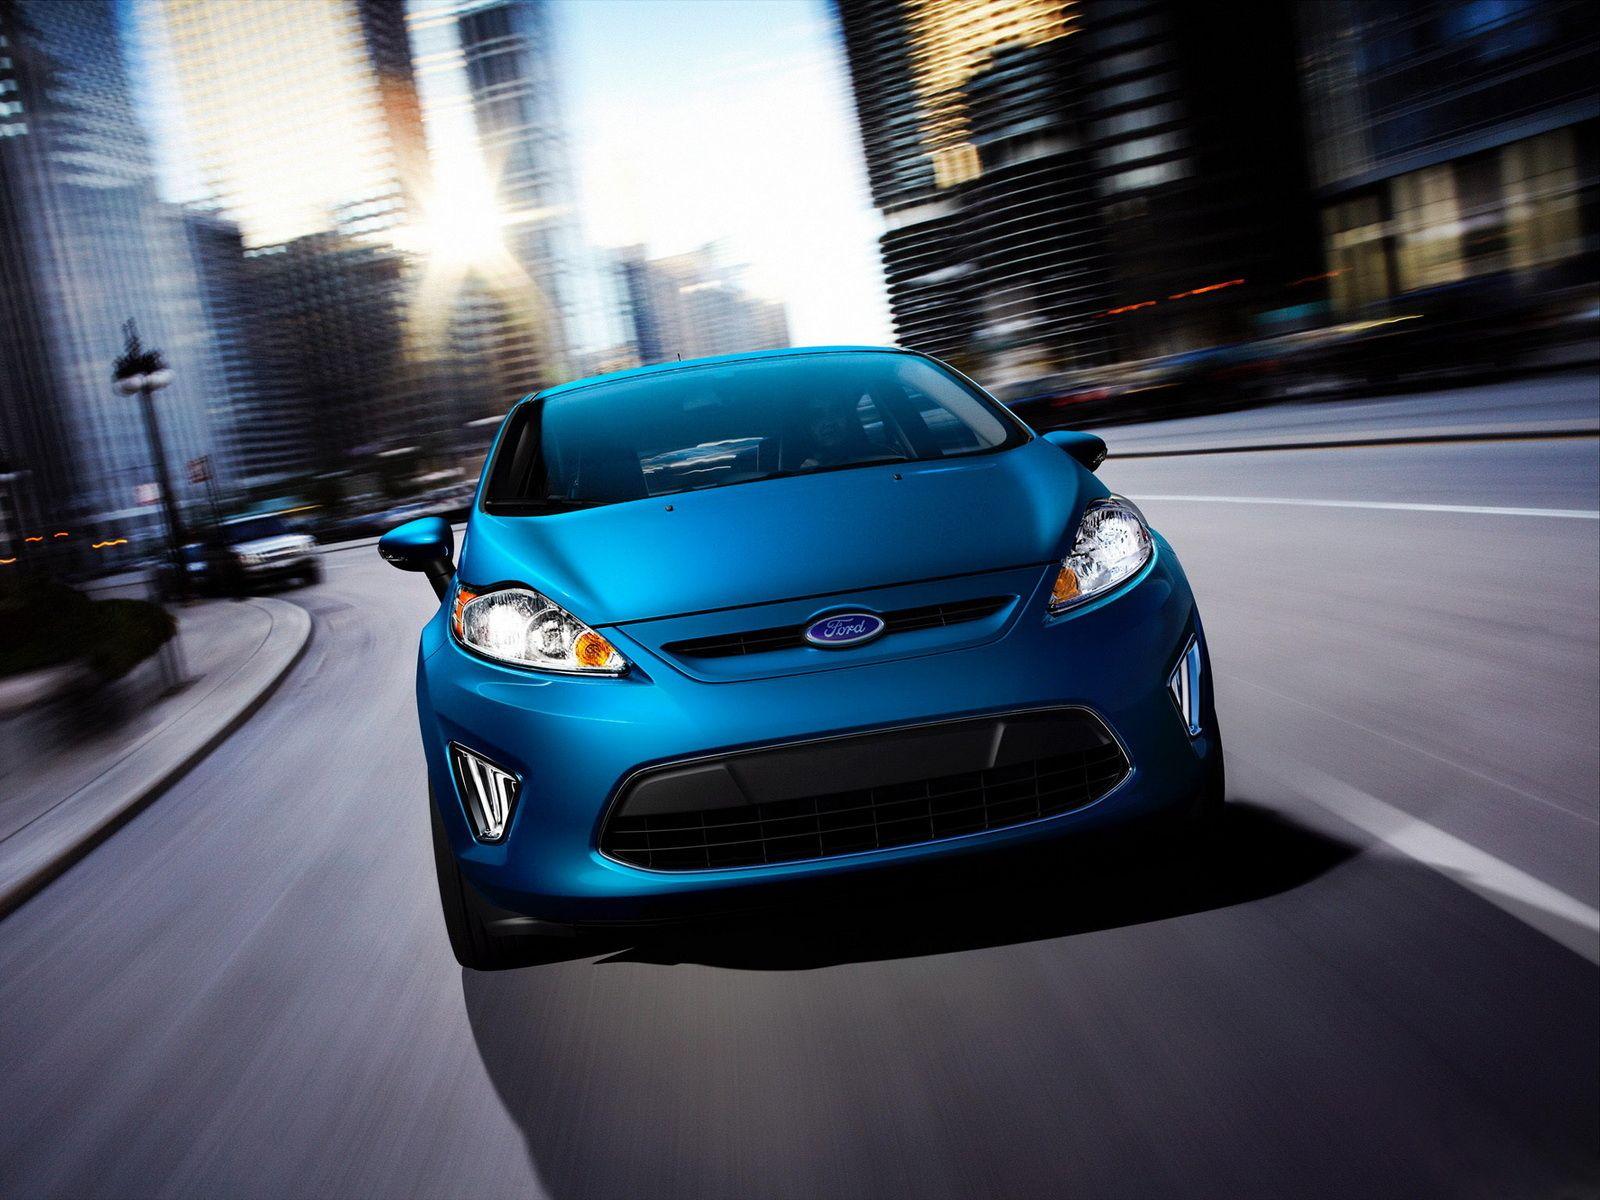 Ford Fiesta Hatchback wallpaper and image, picture